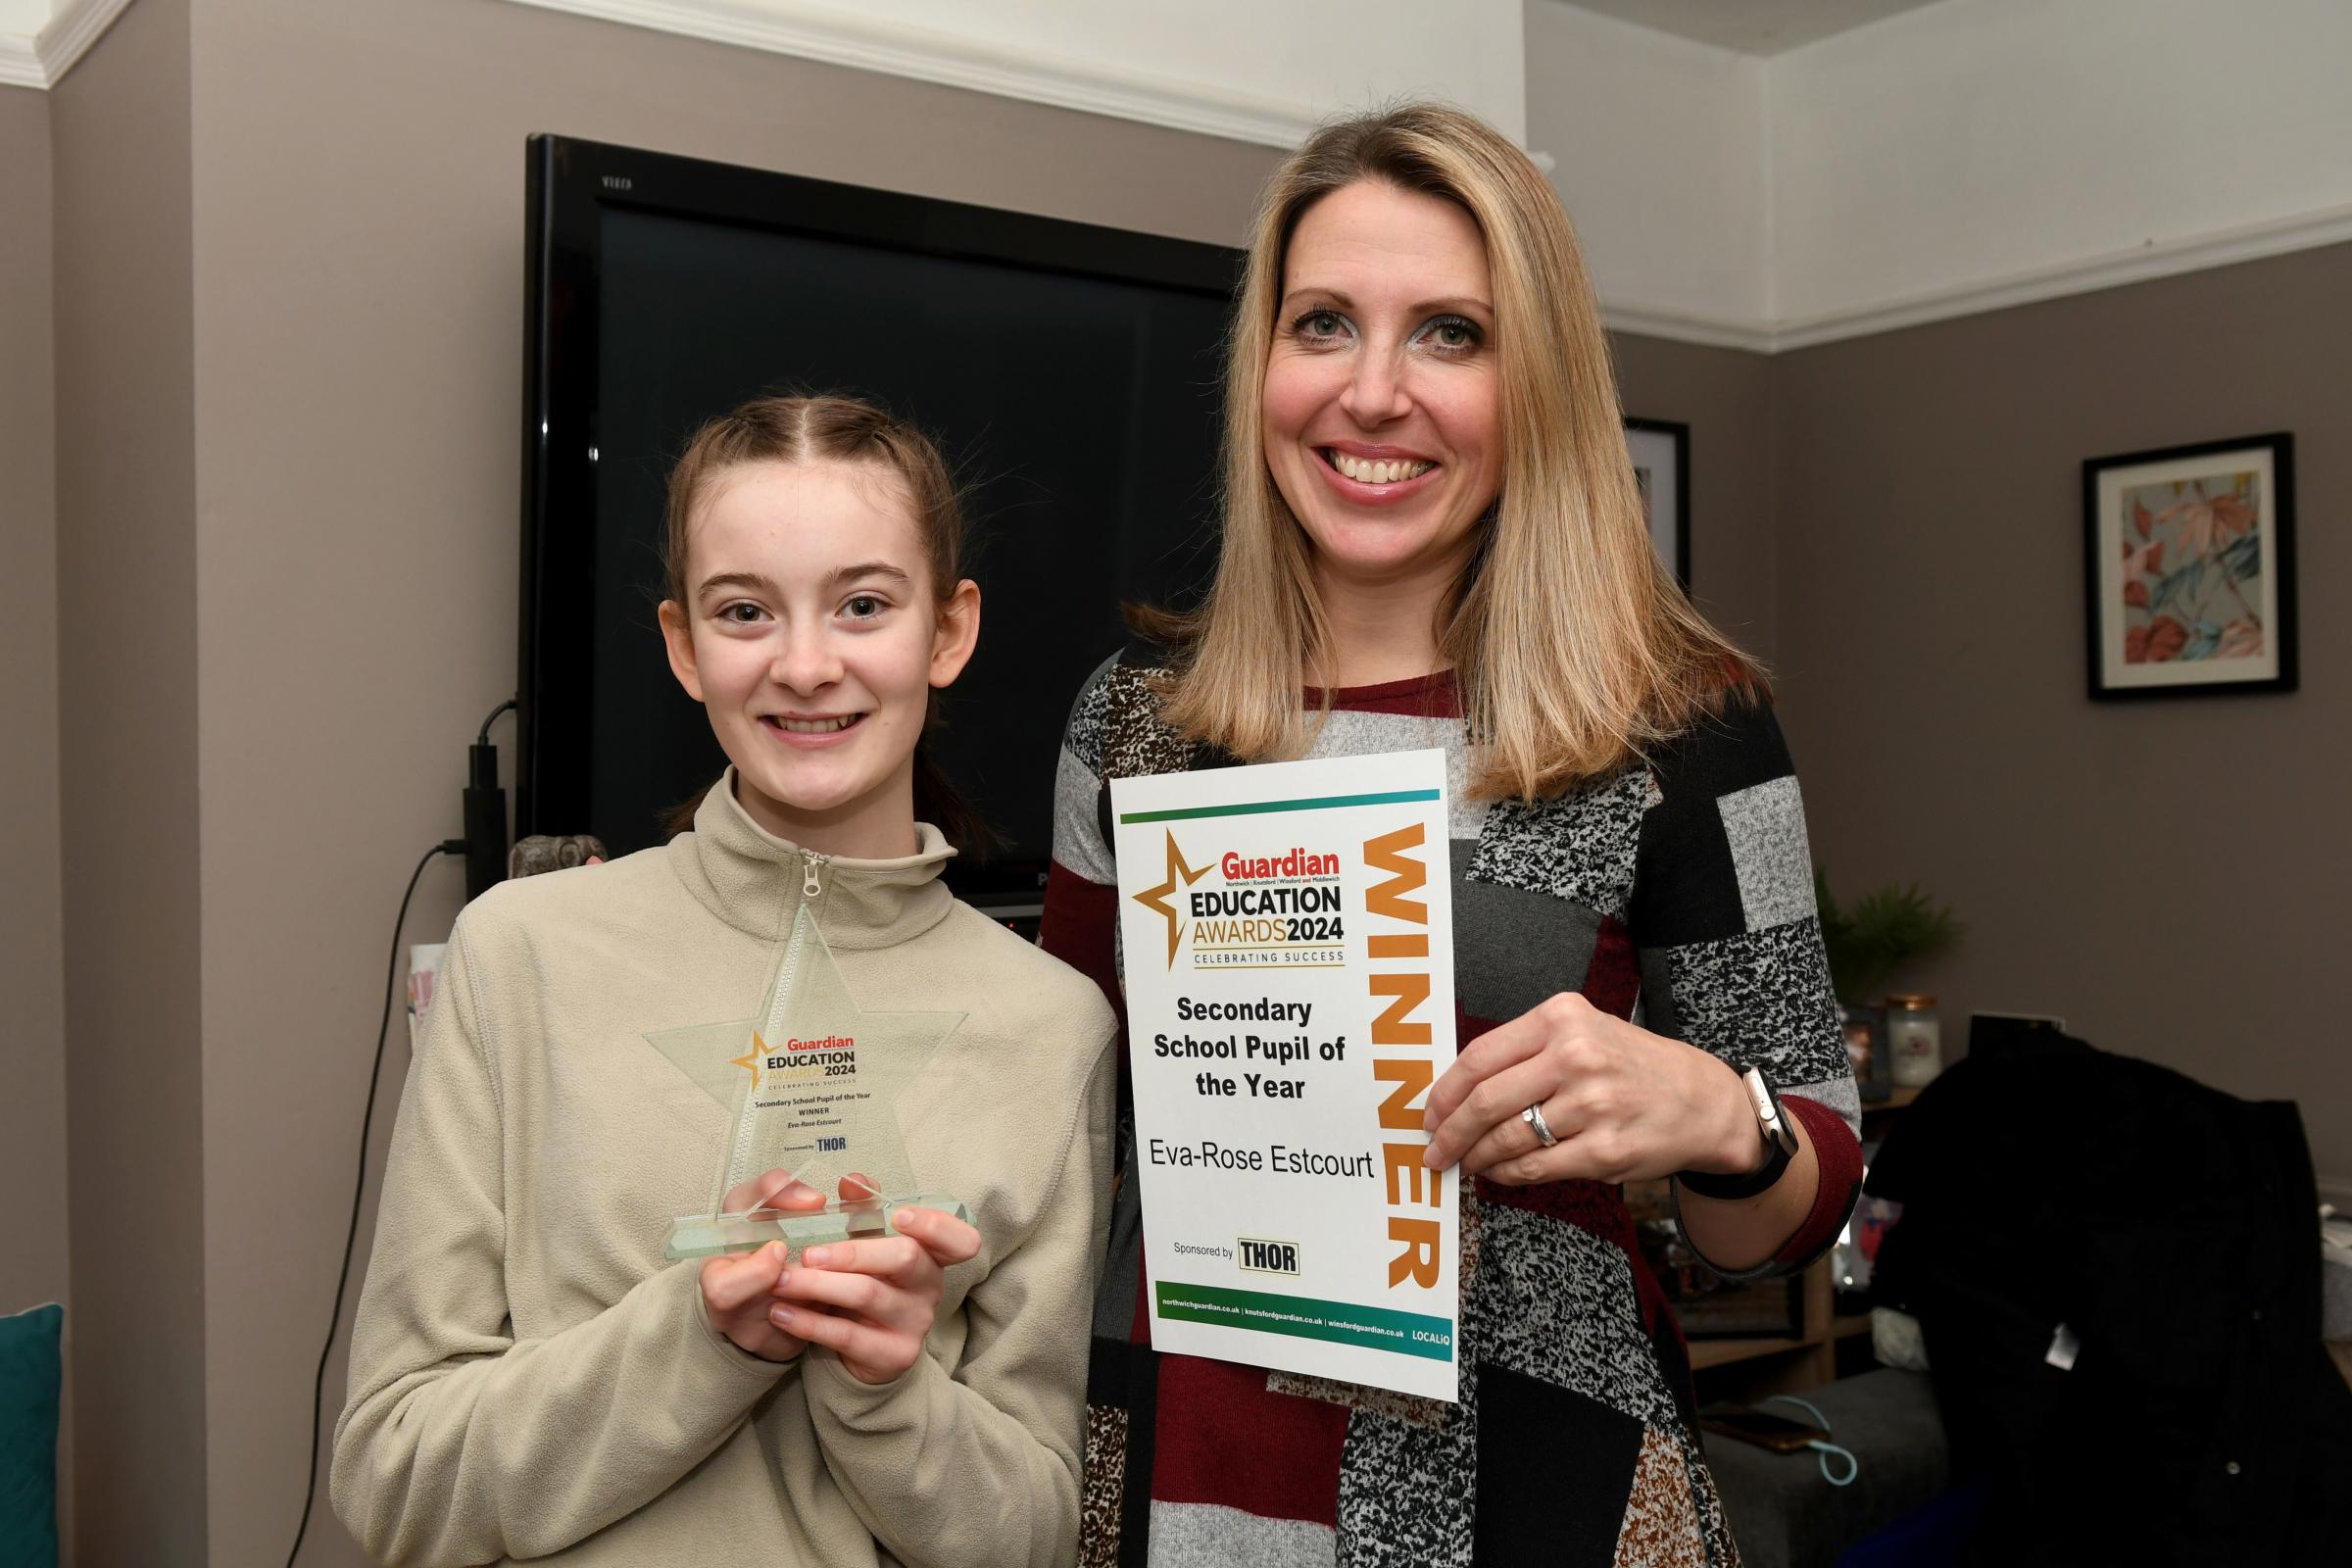 Eva-Rose Estcort was presented with the Secondary School Pupil of the Year Award by the Northwich and Winsford Guardians Heidi Summerfield